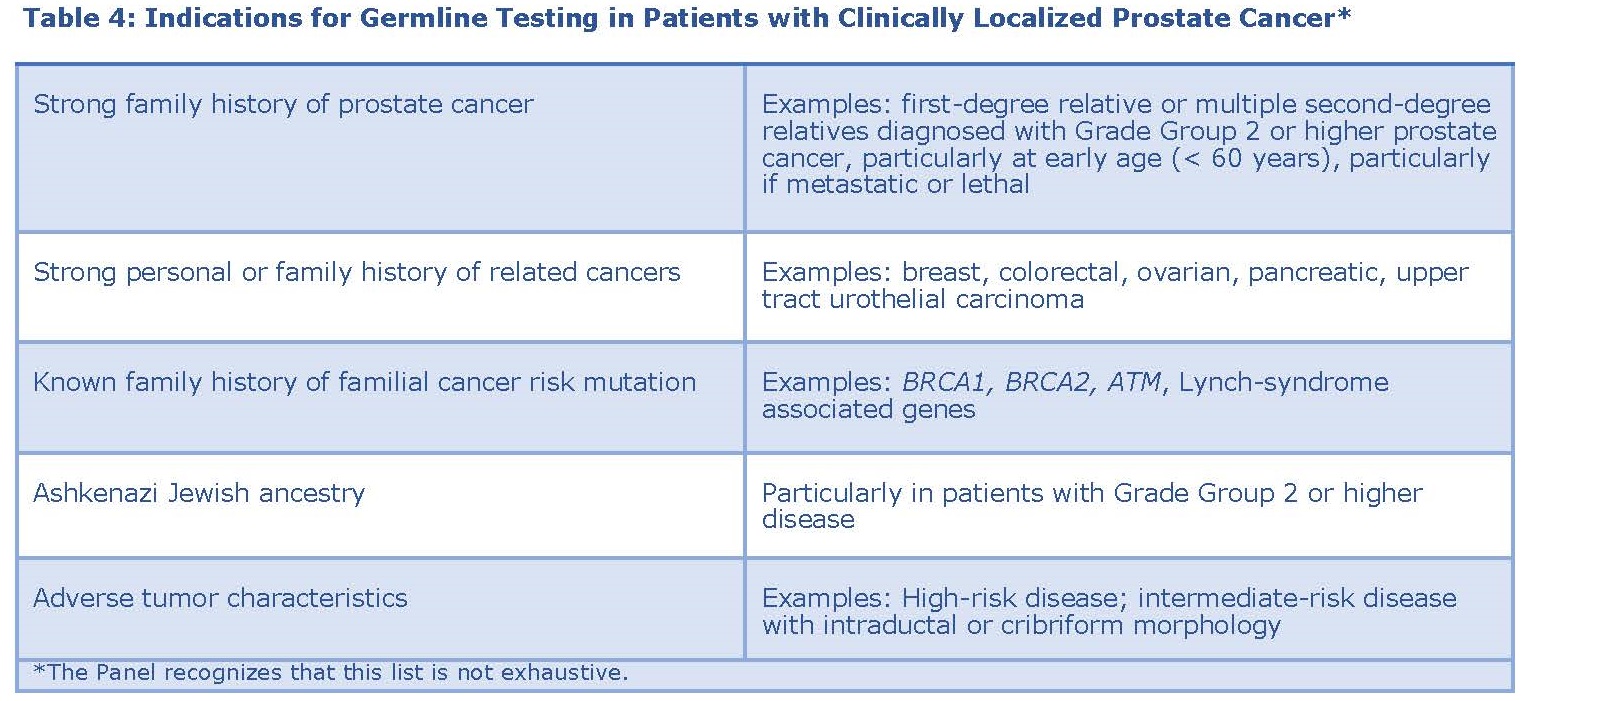 Clinically Localized Prostate Cancer AUA/ASTRO Guideline (2022